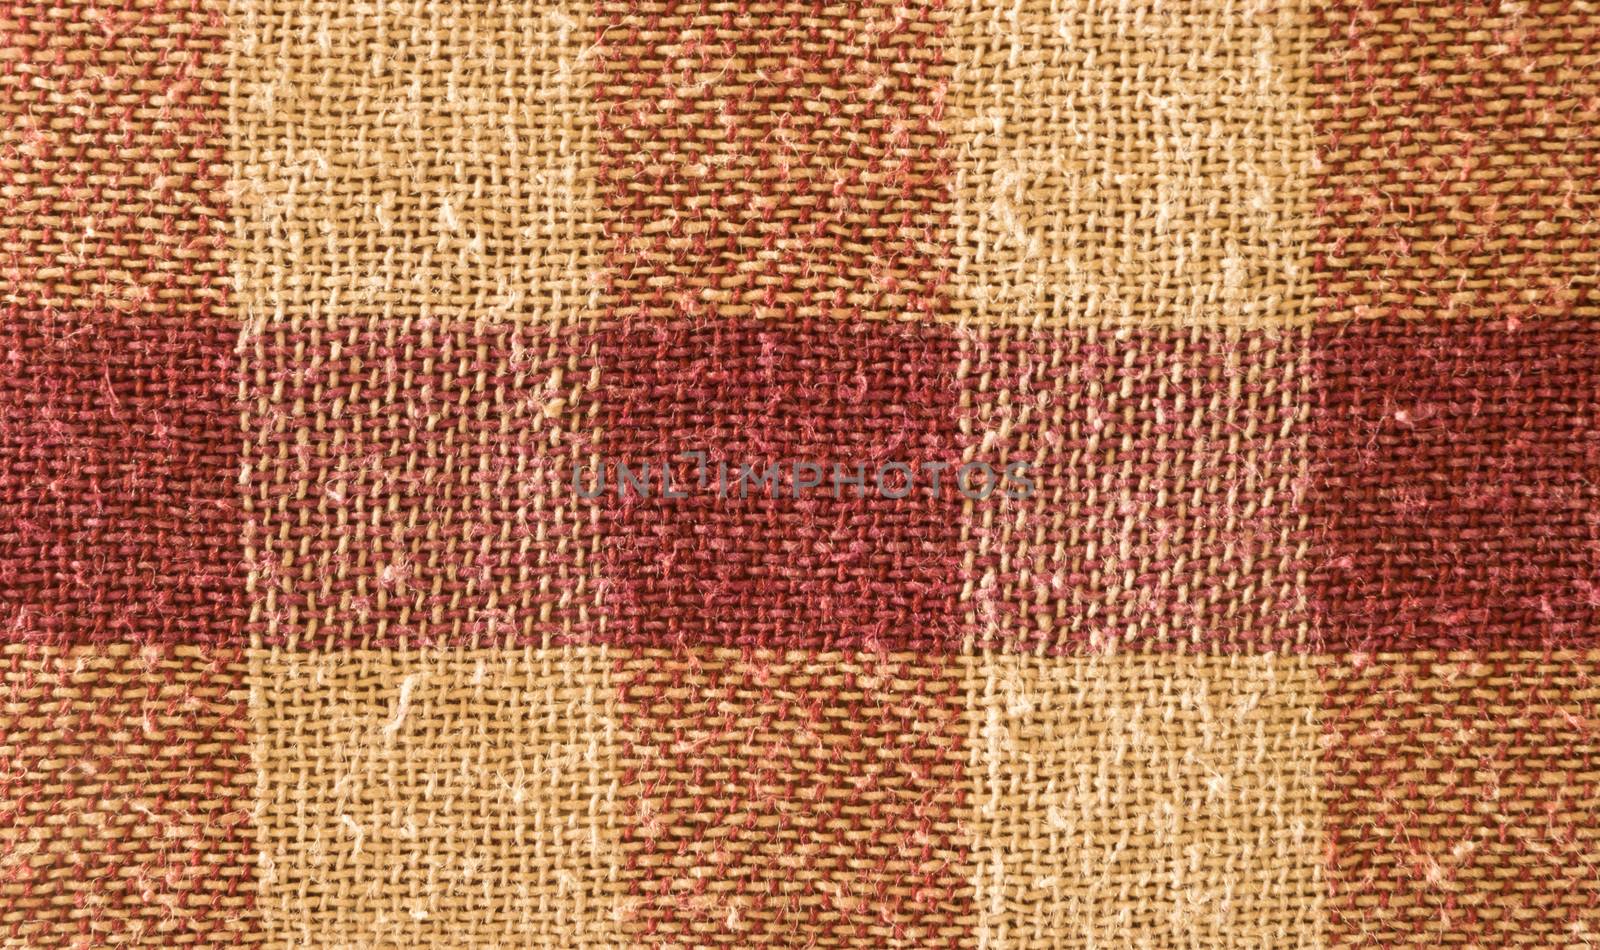 Close up abstract of block checked shape cotton print fabric background. Seamless colorful cloth textile texture of light crisscross pattern. Natural canvas. Studio shot with copy space room for text.